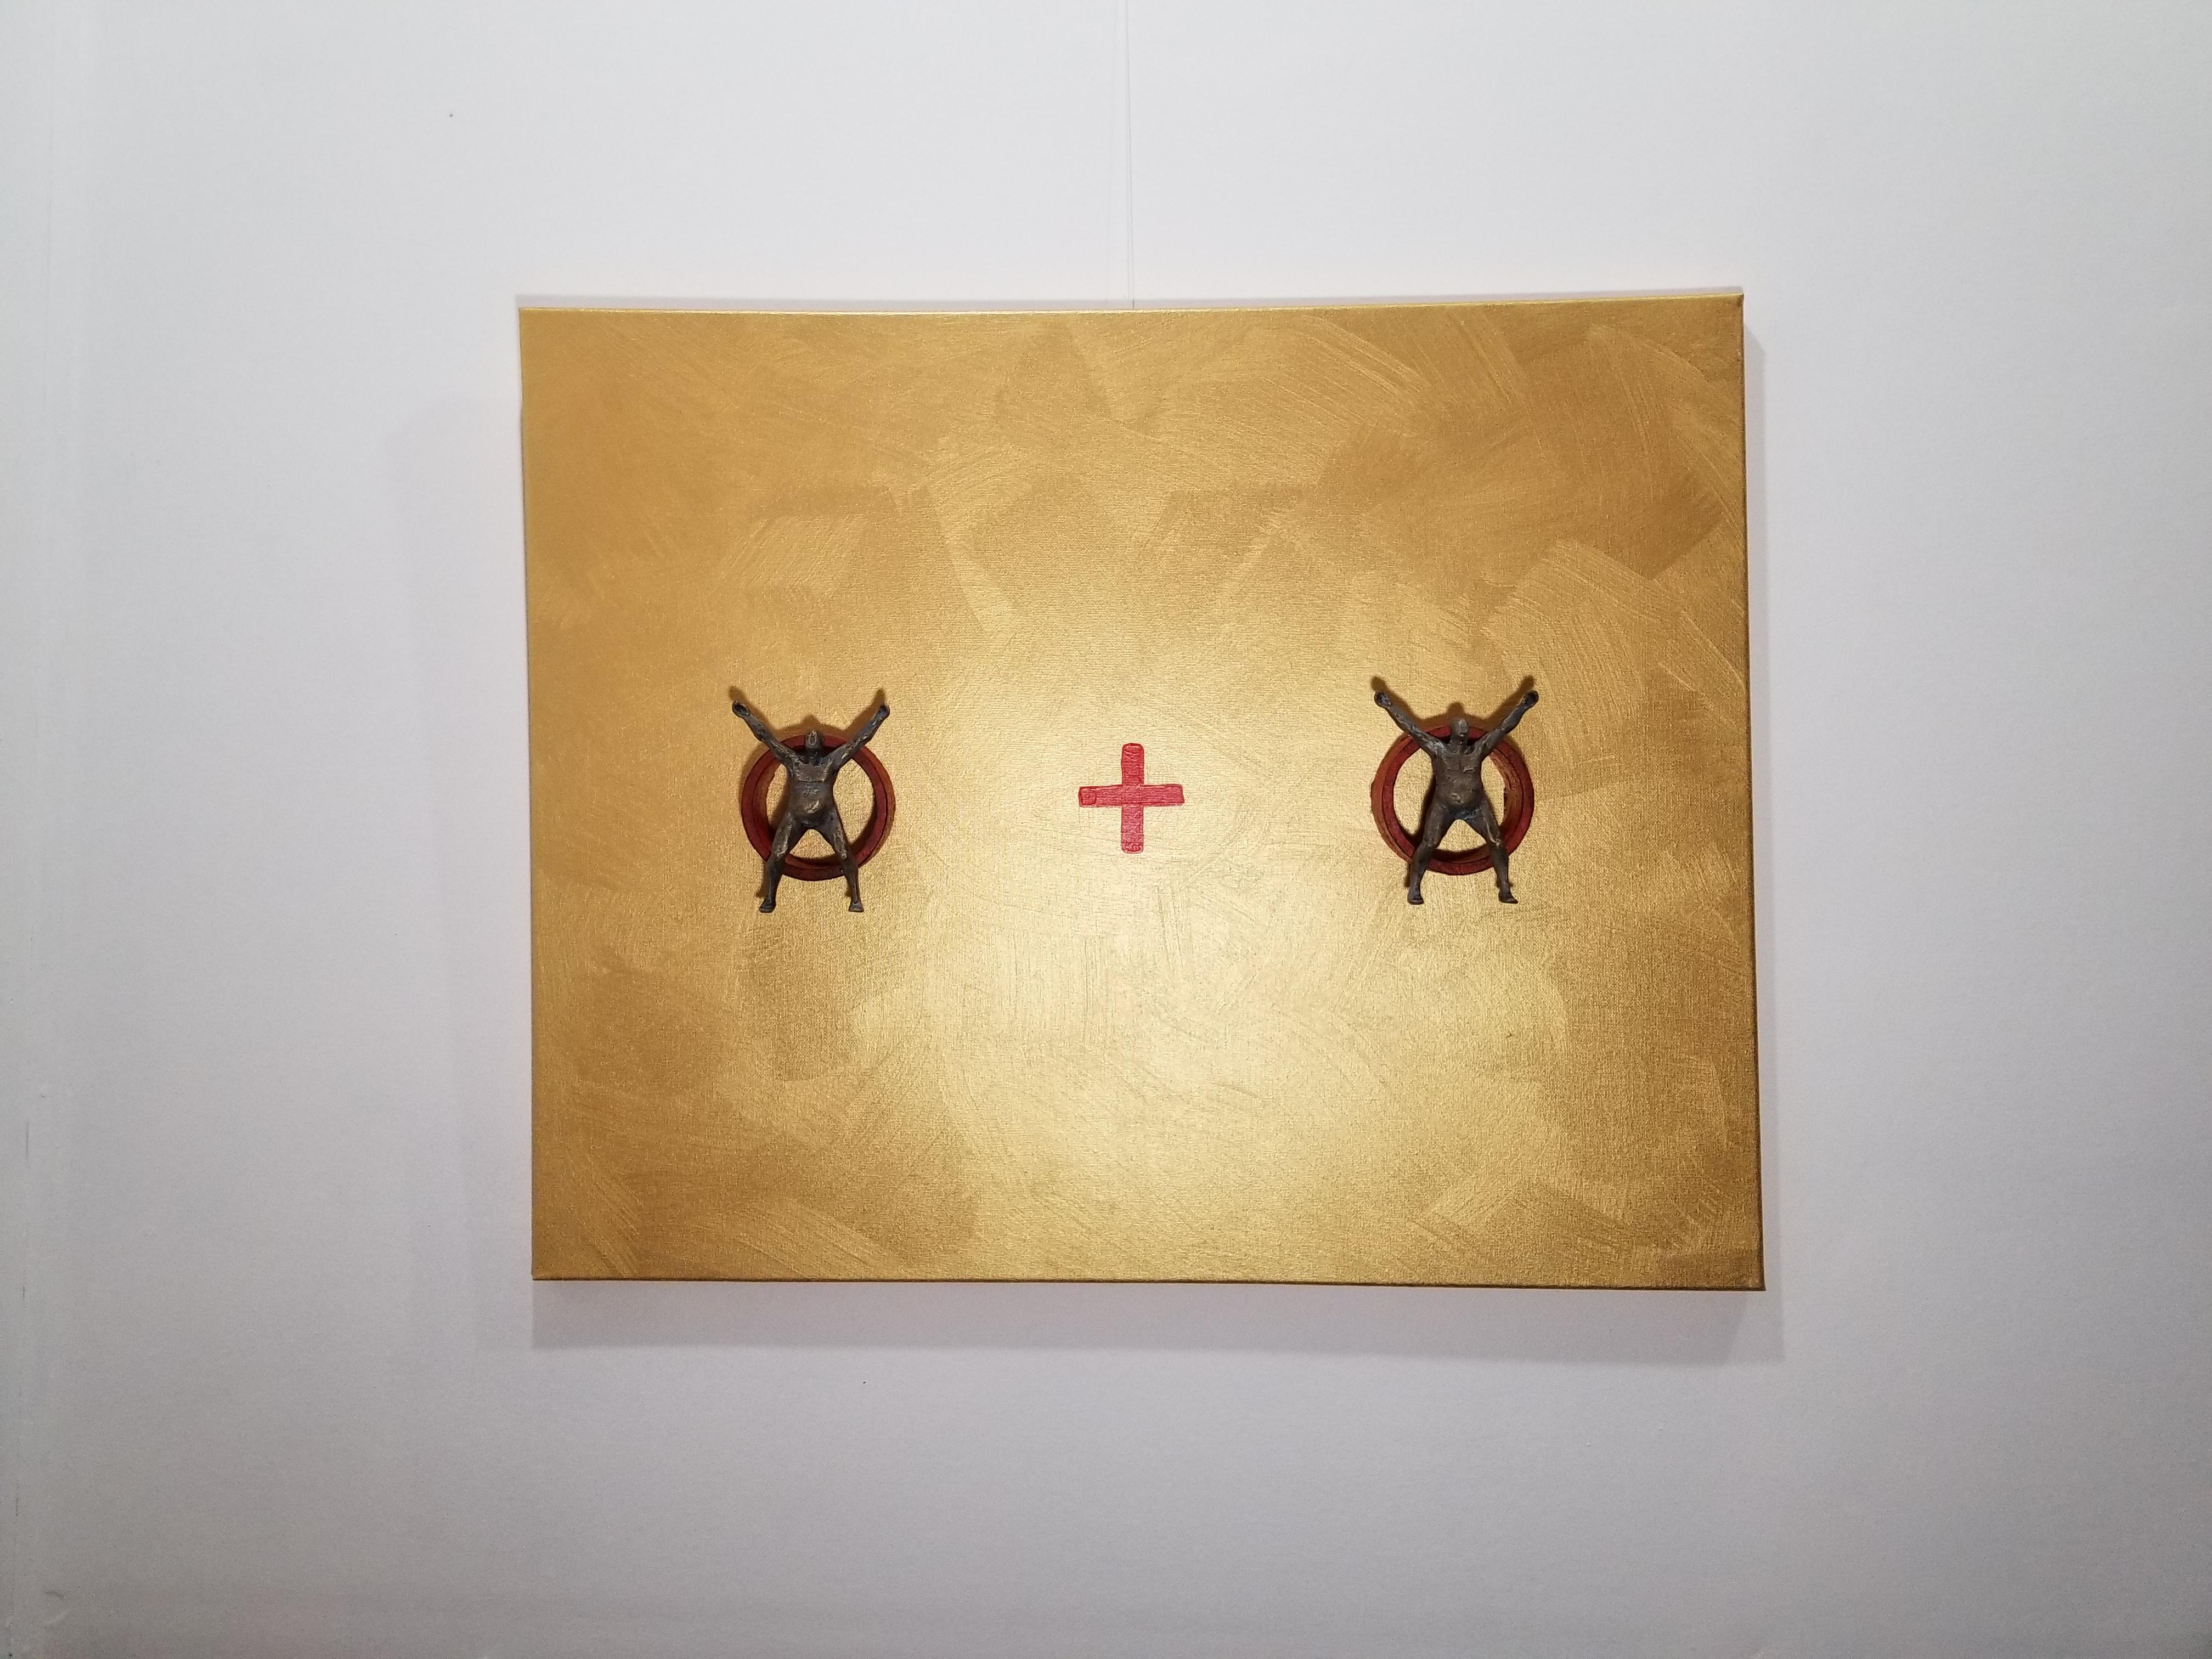 <p>Artist Comments<br>Inspired by minimalism, artist Yelitza Diaz presents a compelling piece featuring two figures painted to look like bronze. She offers an equation with 3D elements as a nod to Reinhardt. 